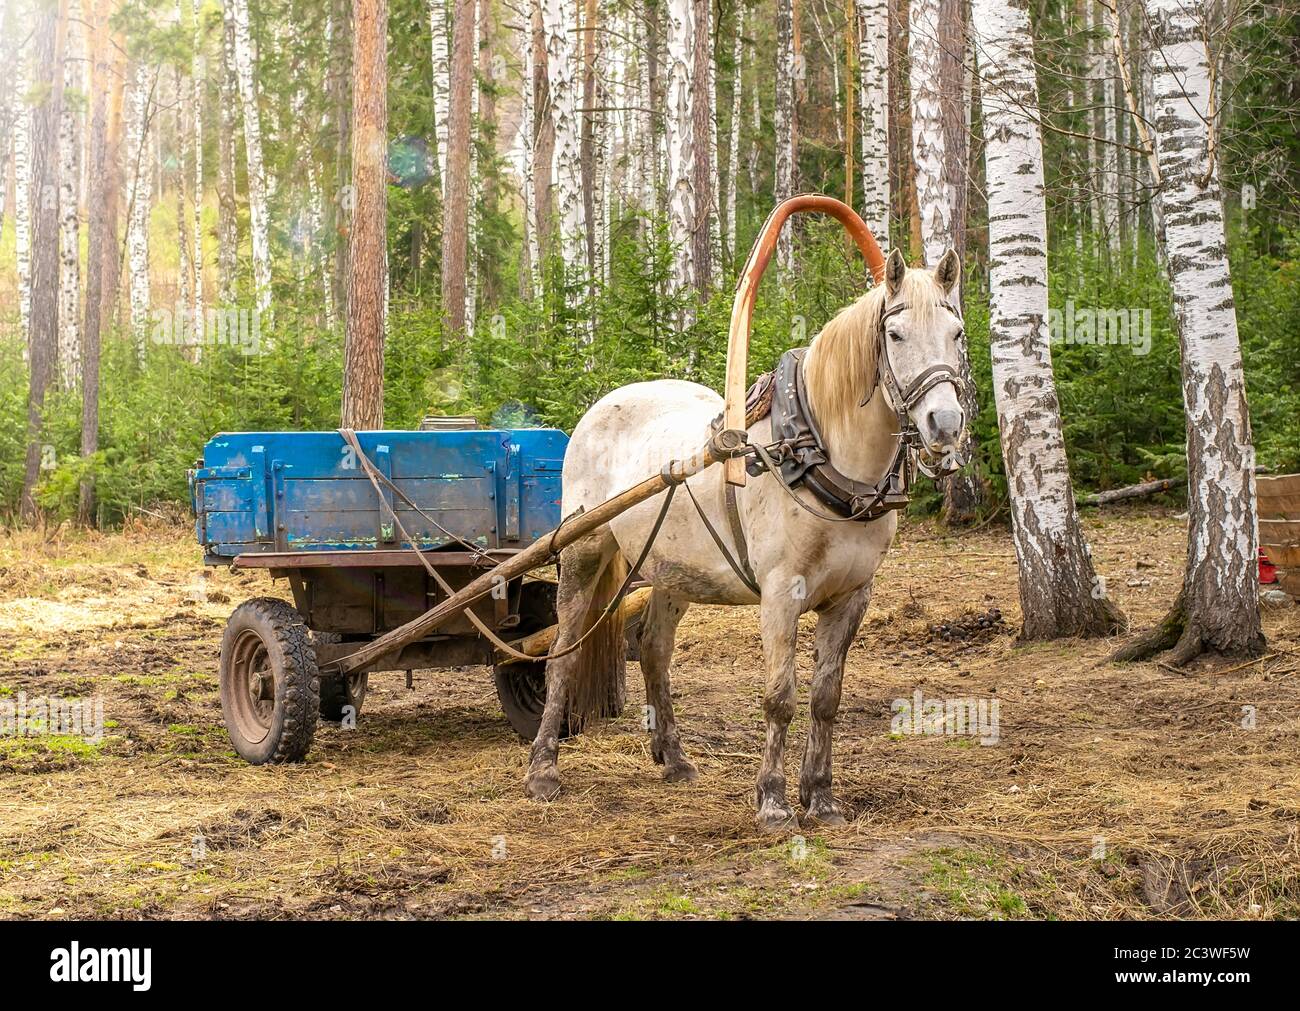 a white country horse harnessed to a cart stands in a birch forest Stock Photo